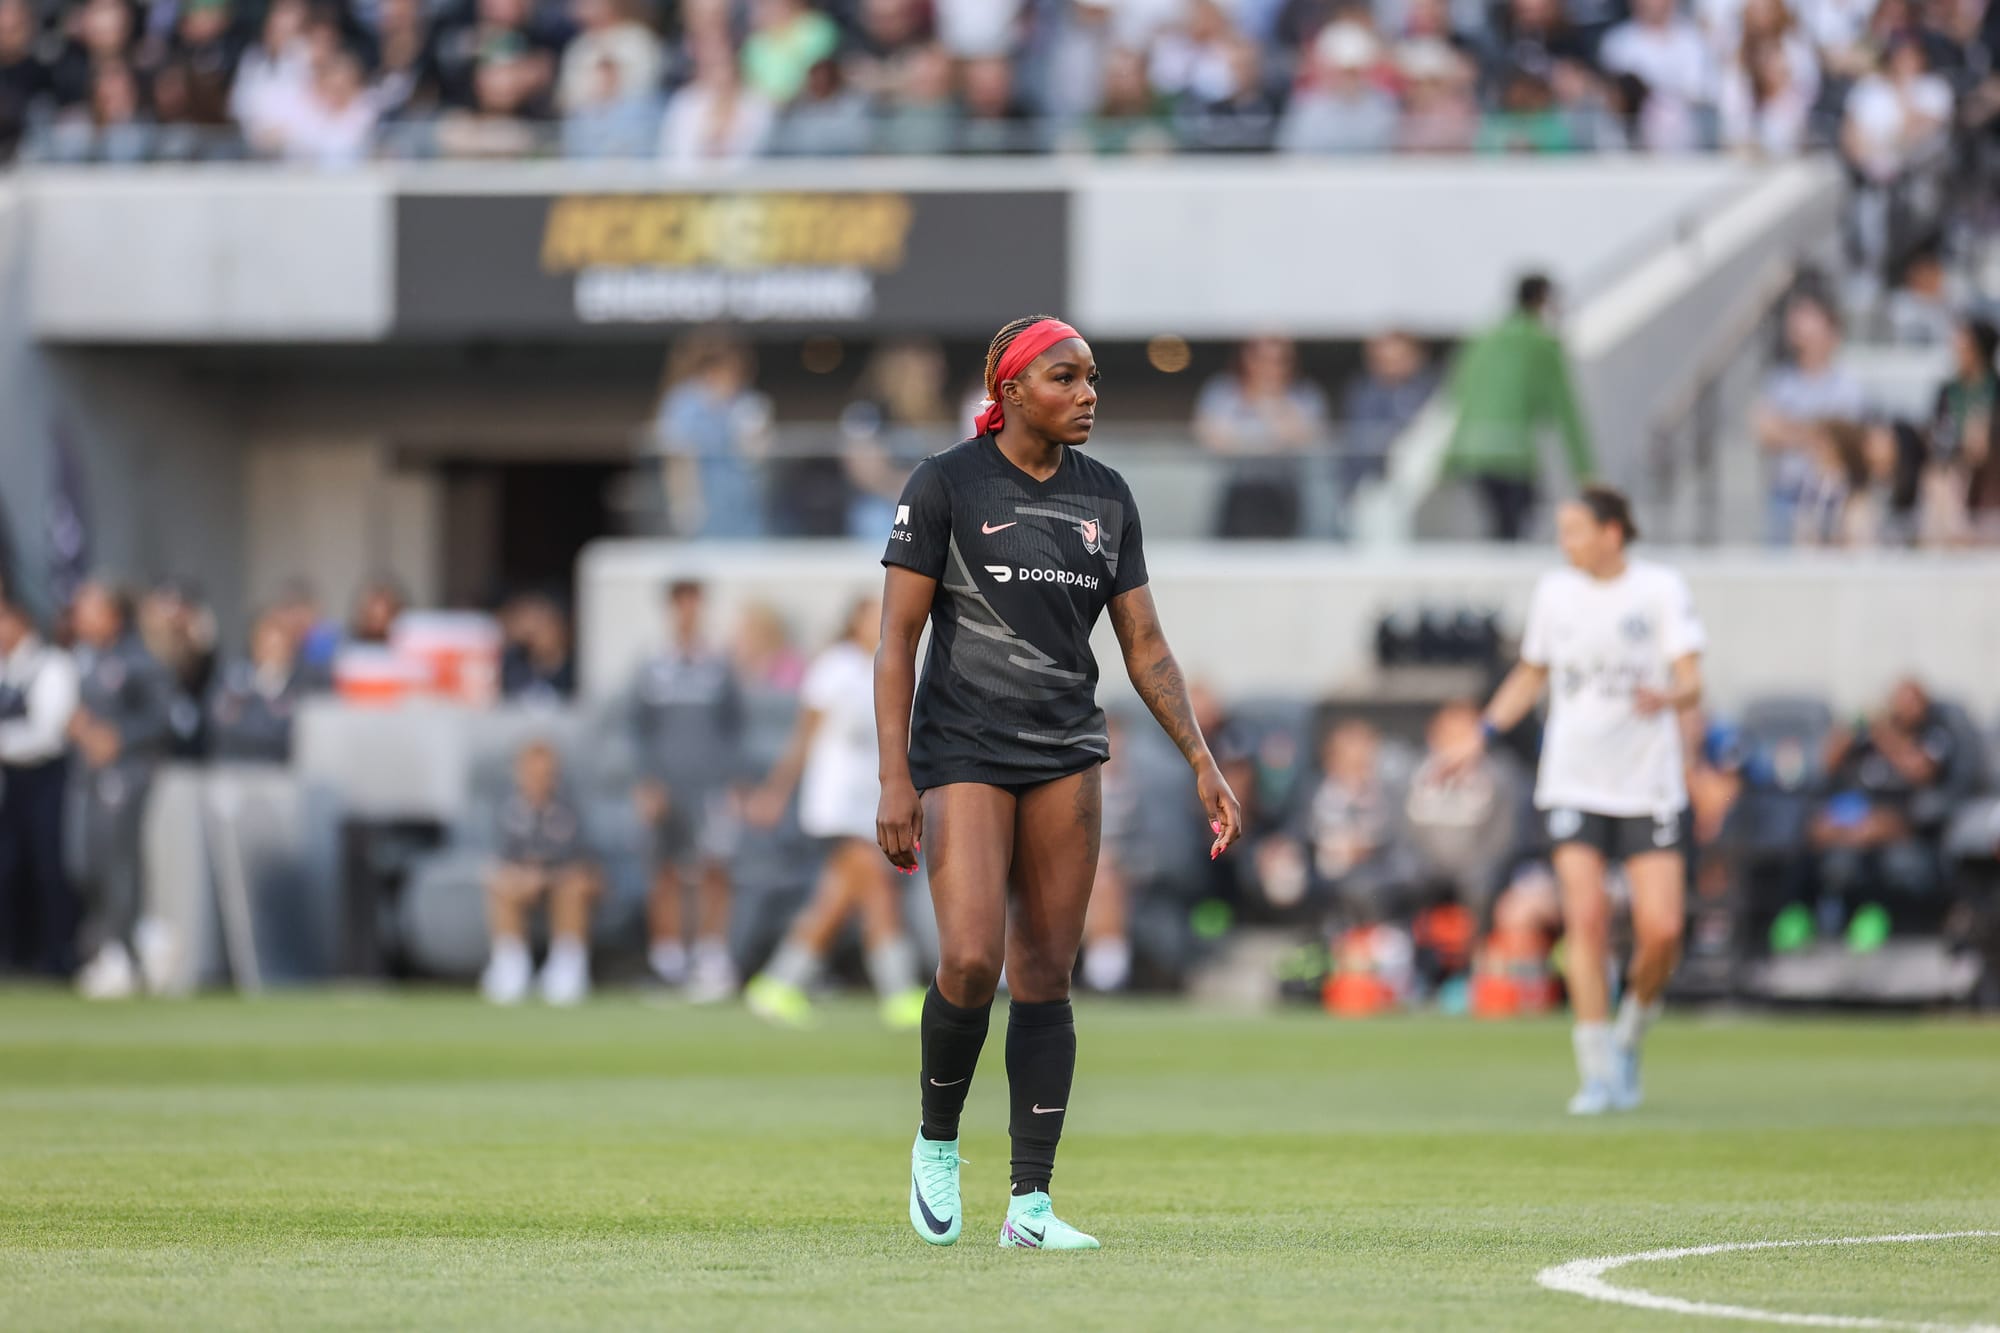 NWSL Snap: Season opens with immaculate chaos, Bay history